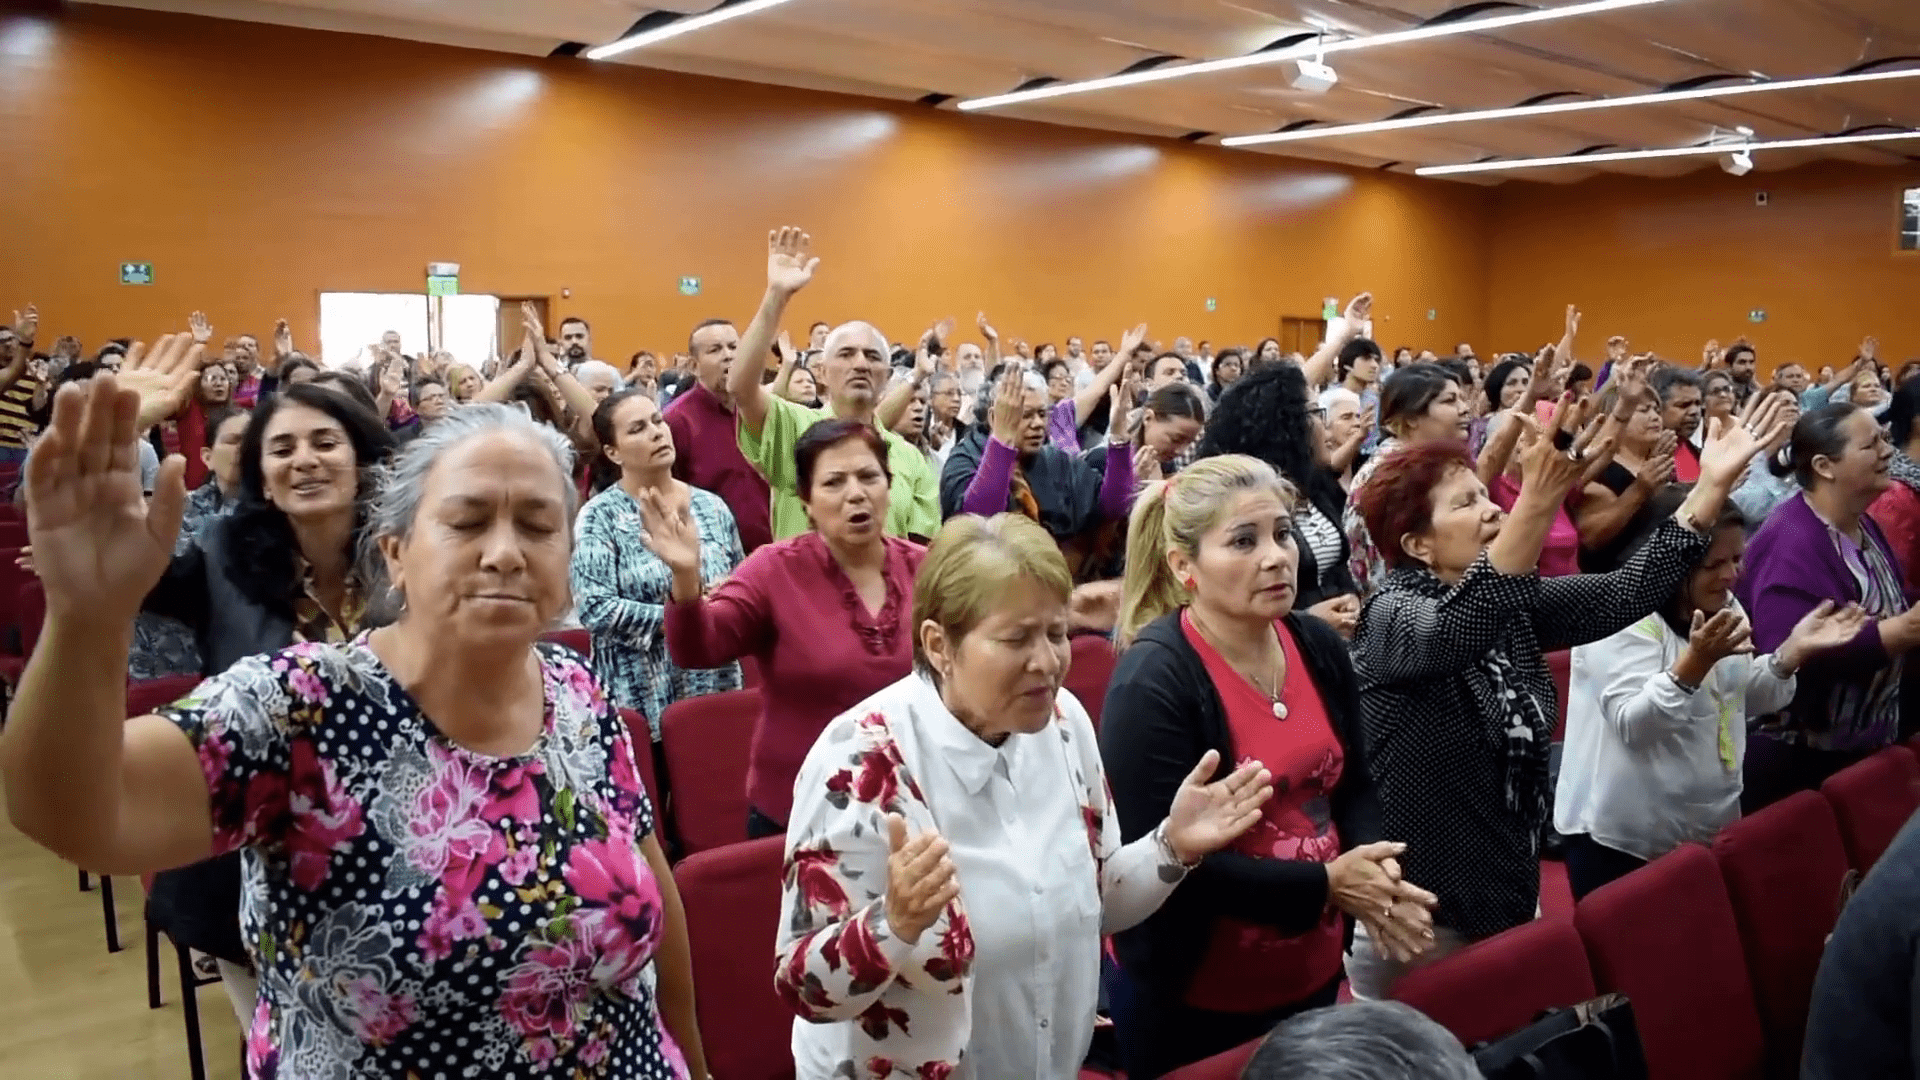 The Evangelical Church has experienced significant growth in Latin America, transforming the religious and social landscape of the region.